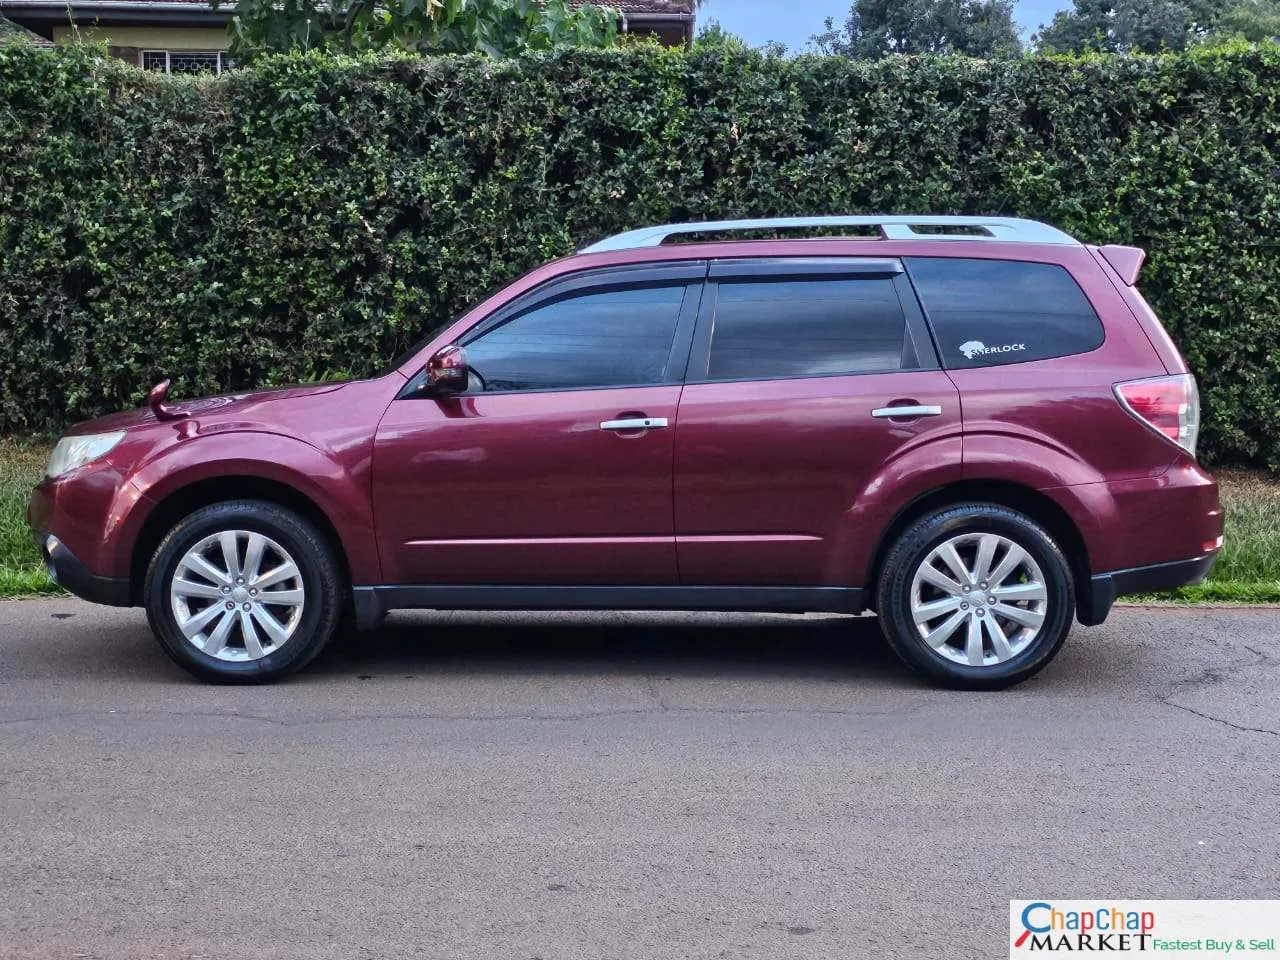 Subaru Forester for sale in kenya hire purchase installments You Pay 30% deposit Trade in Ok Forester kenya EXCLUSIVE (SOLD)